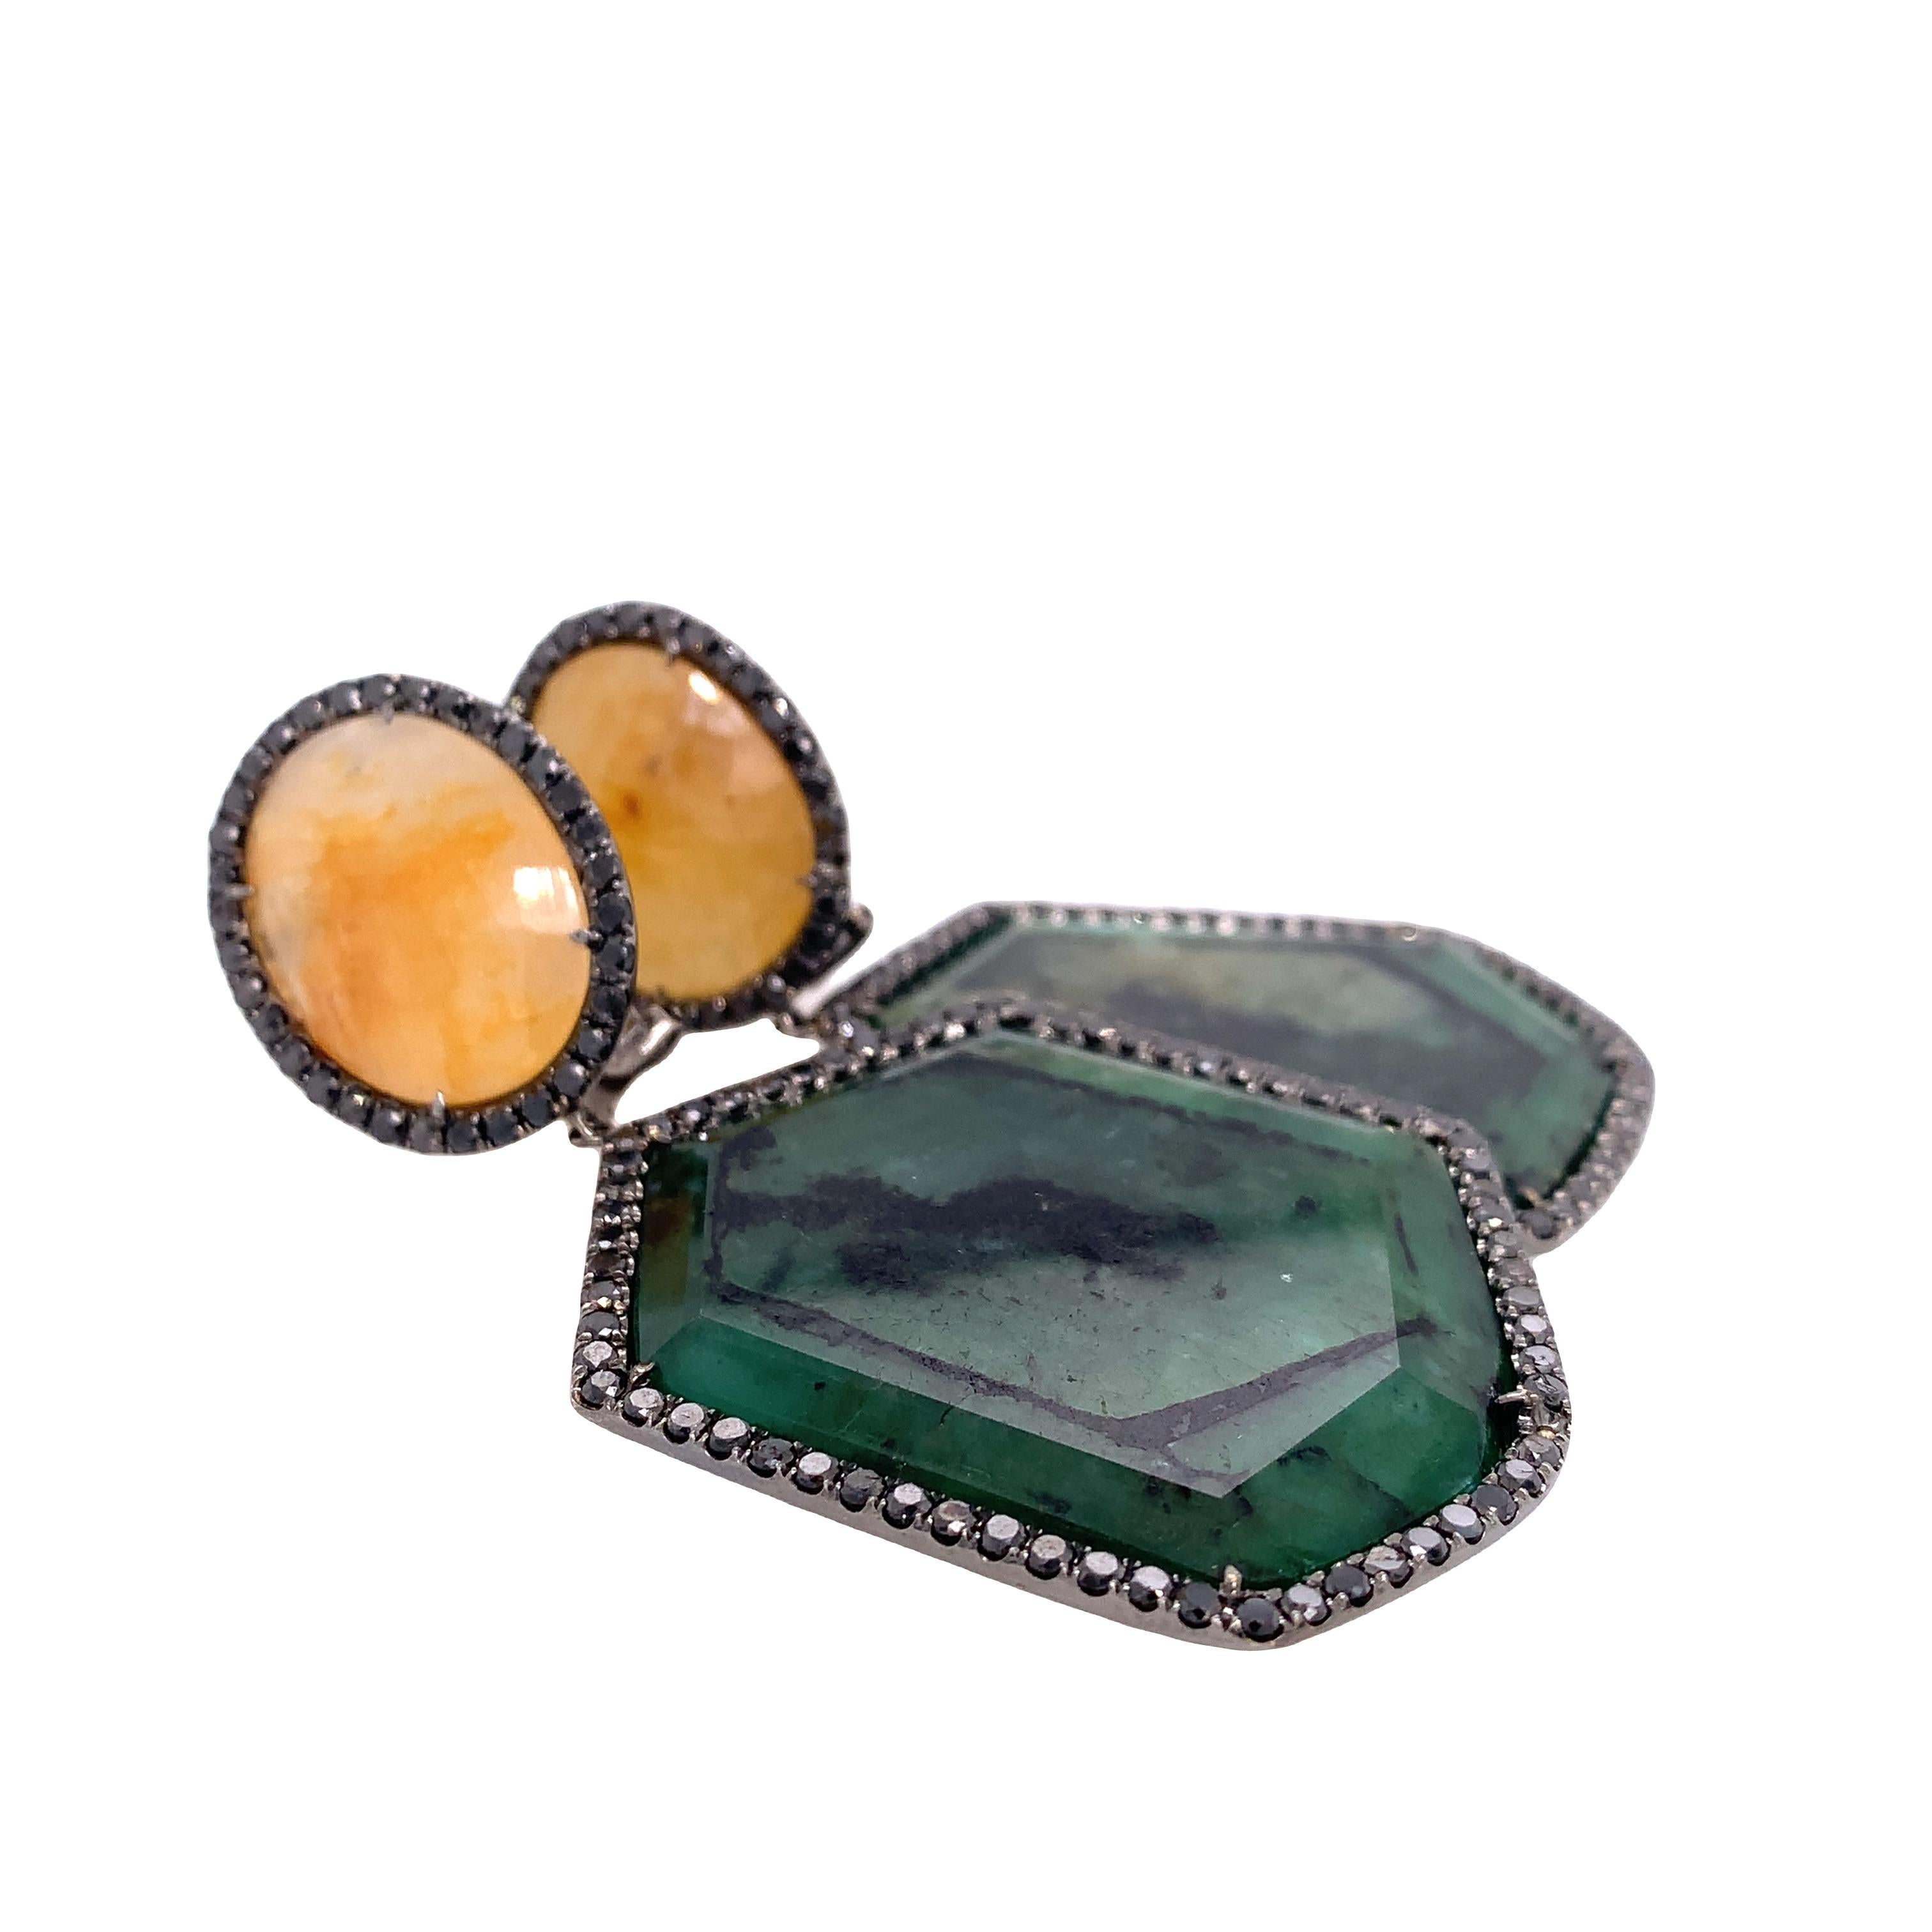 Lillipad Collection

Yellow Sapphire and natural Slice Emerald wrapped by Black Diamond statement earrings set in 18k black gold.

Emerald: 84.28ct total weight
Yellow Sapphire: 32.38ct total weight
Black Diamond: 4.86ct total weight